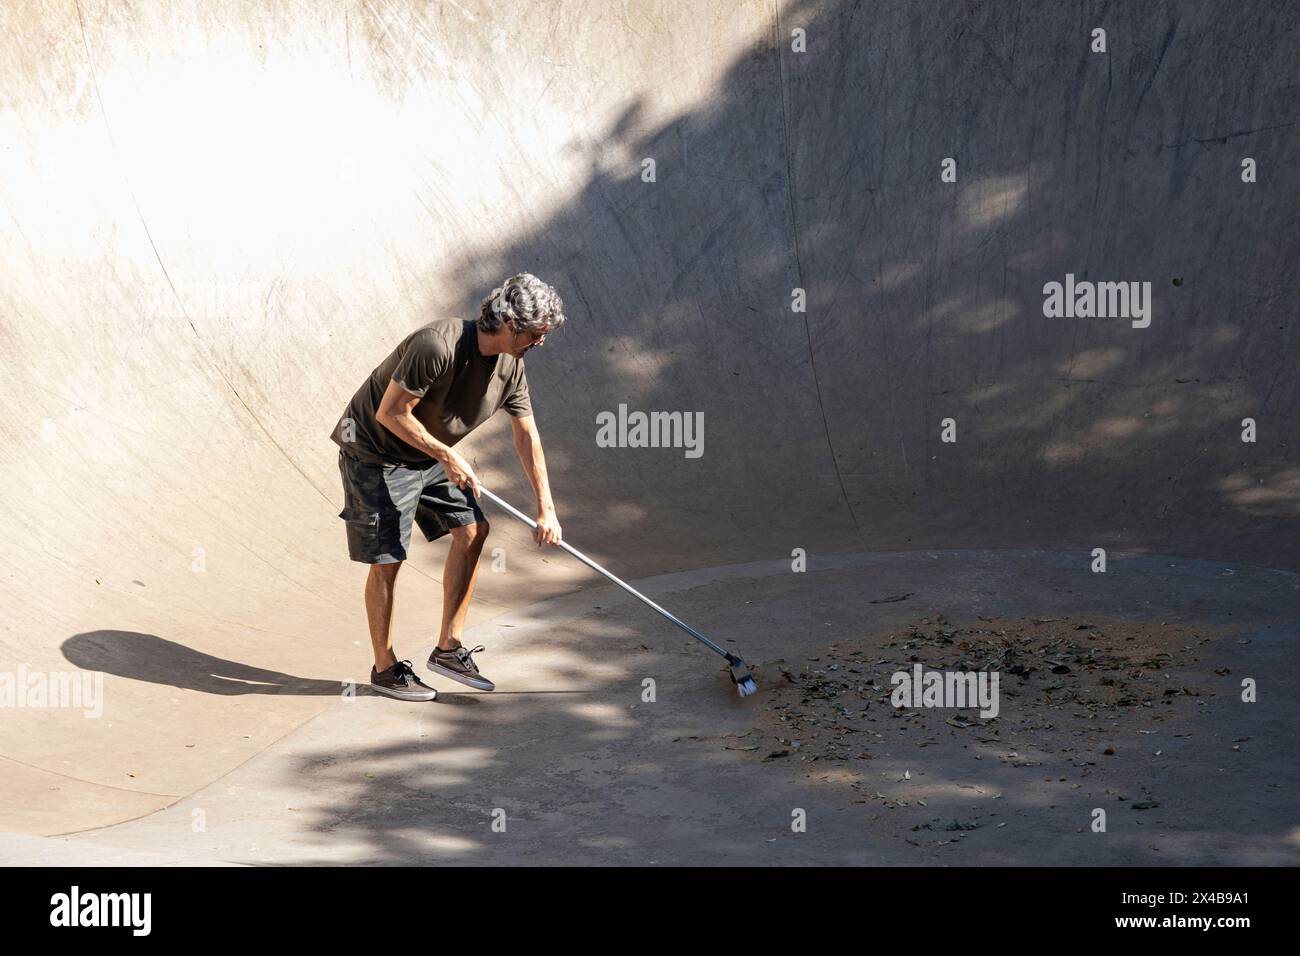 54 year old Brazilian sweeping the skate lane before using it 1. Stock Photo